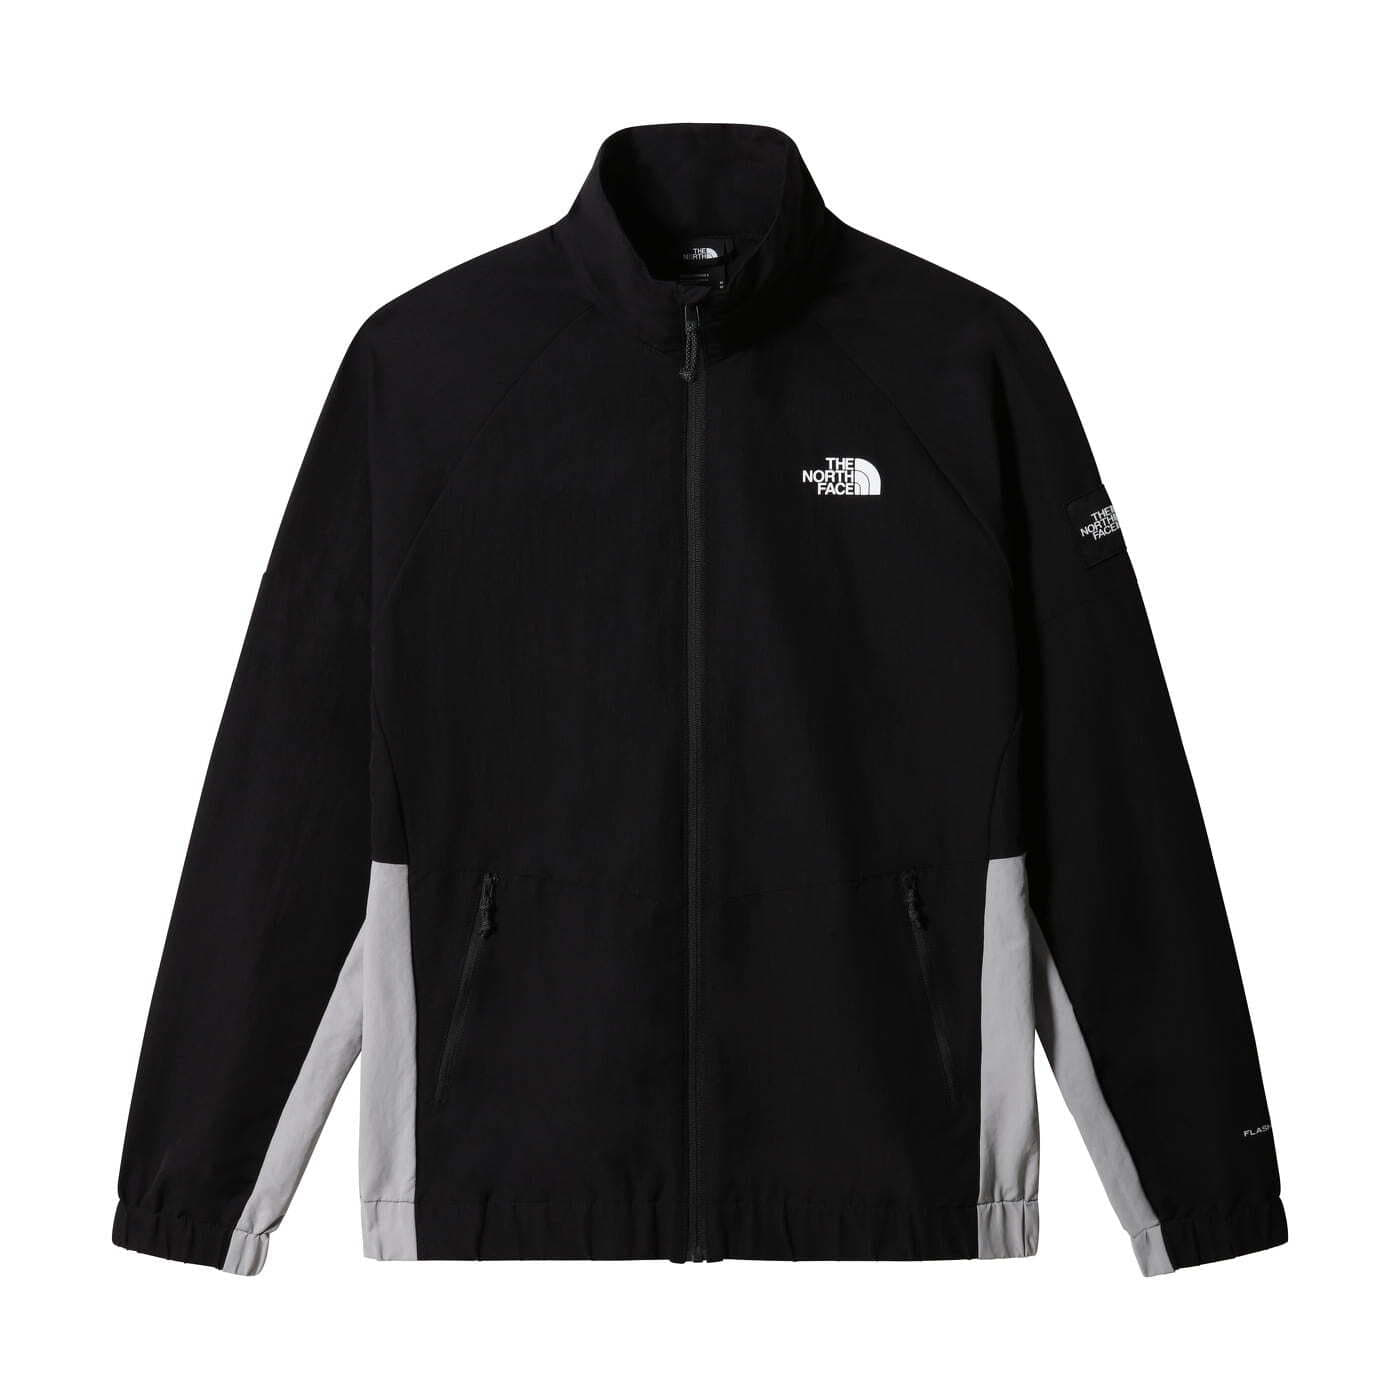 The North Face Phlego Track Top